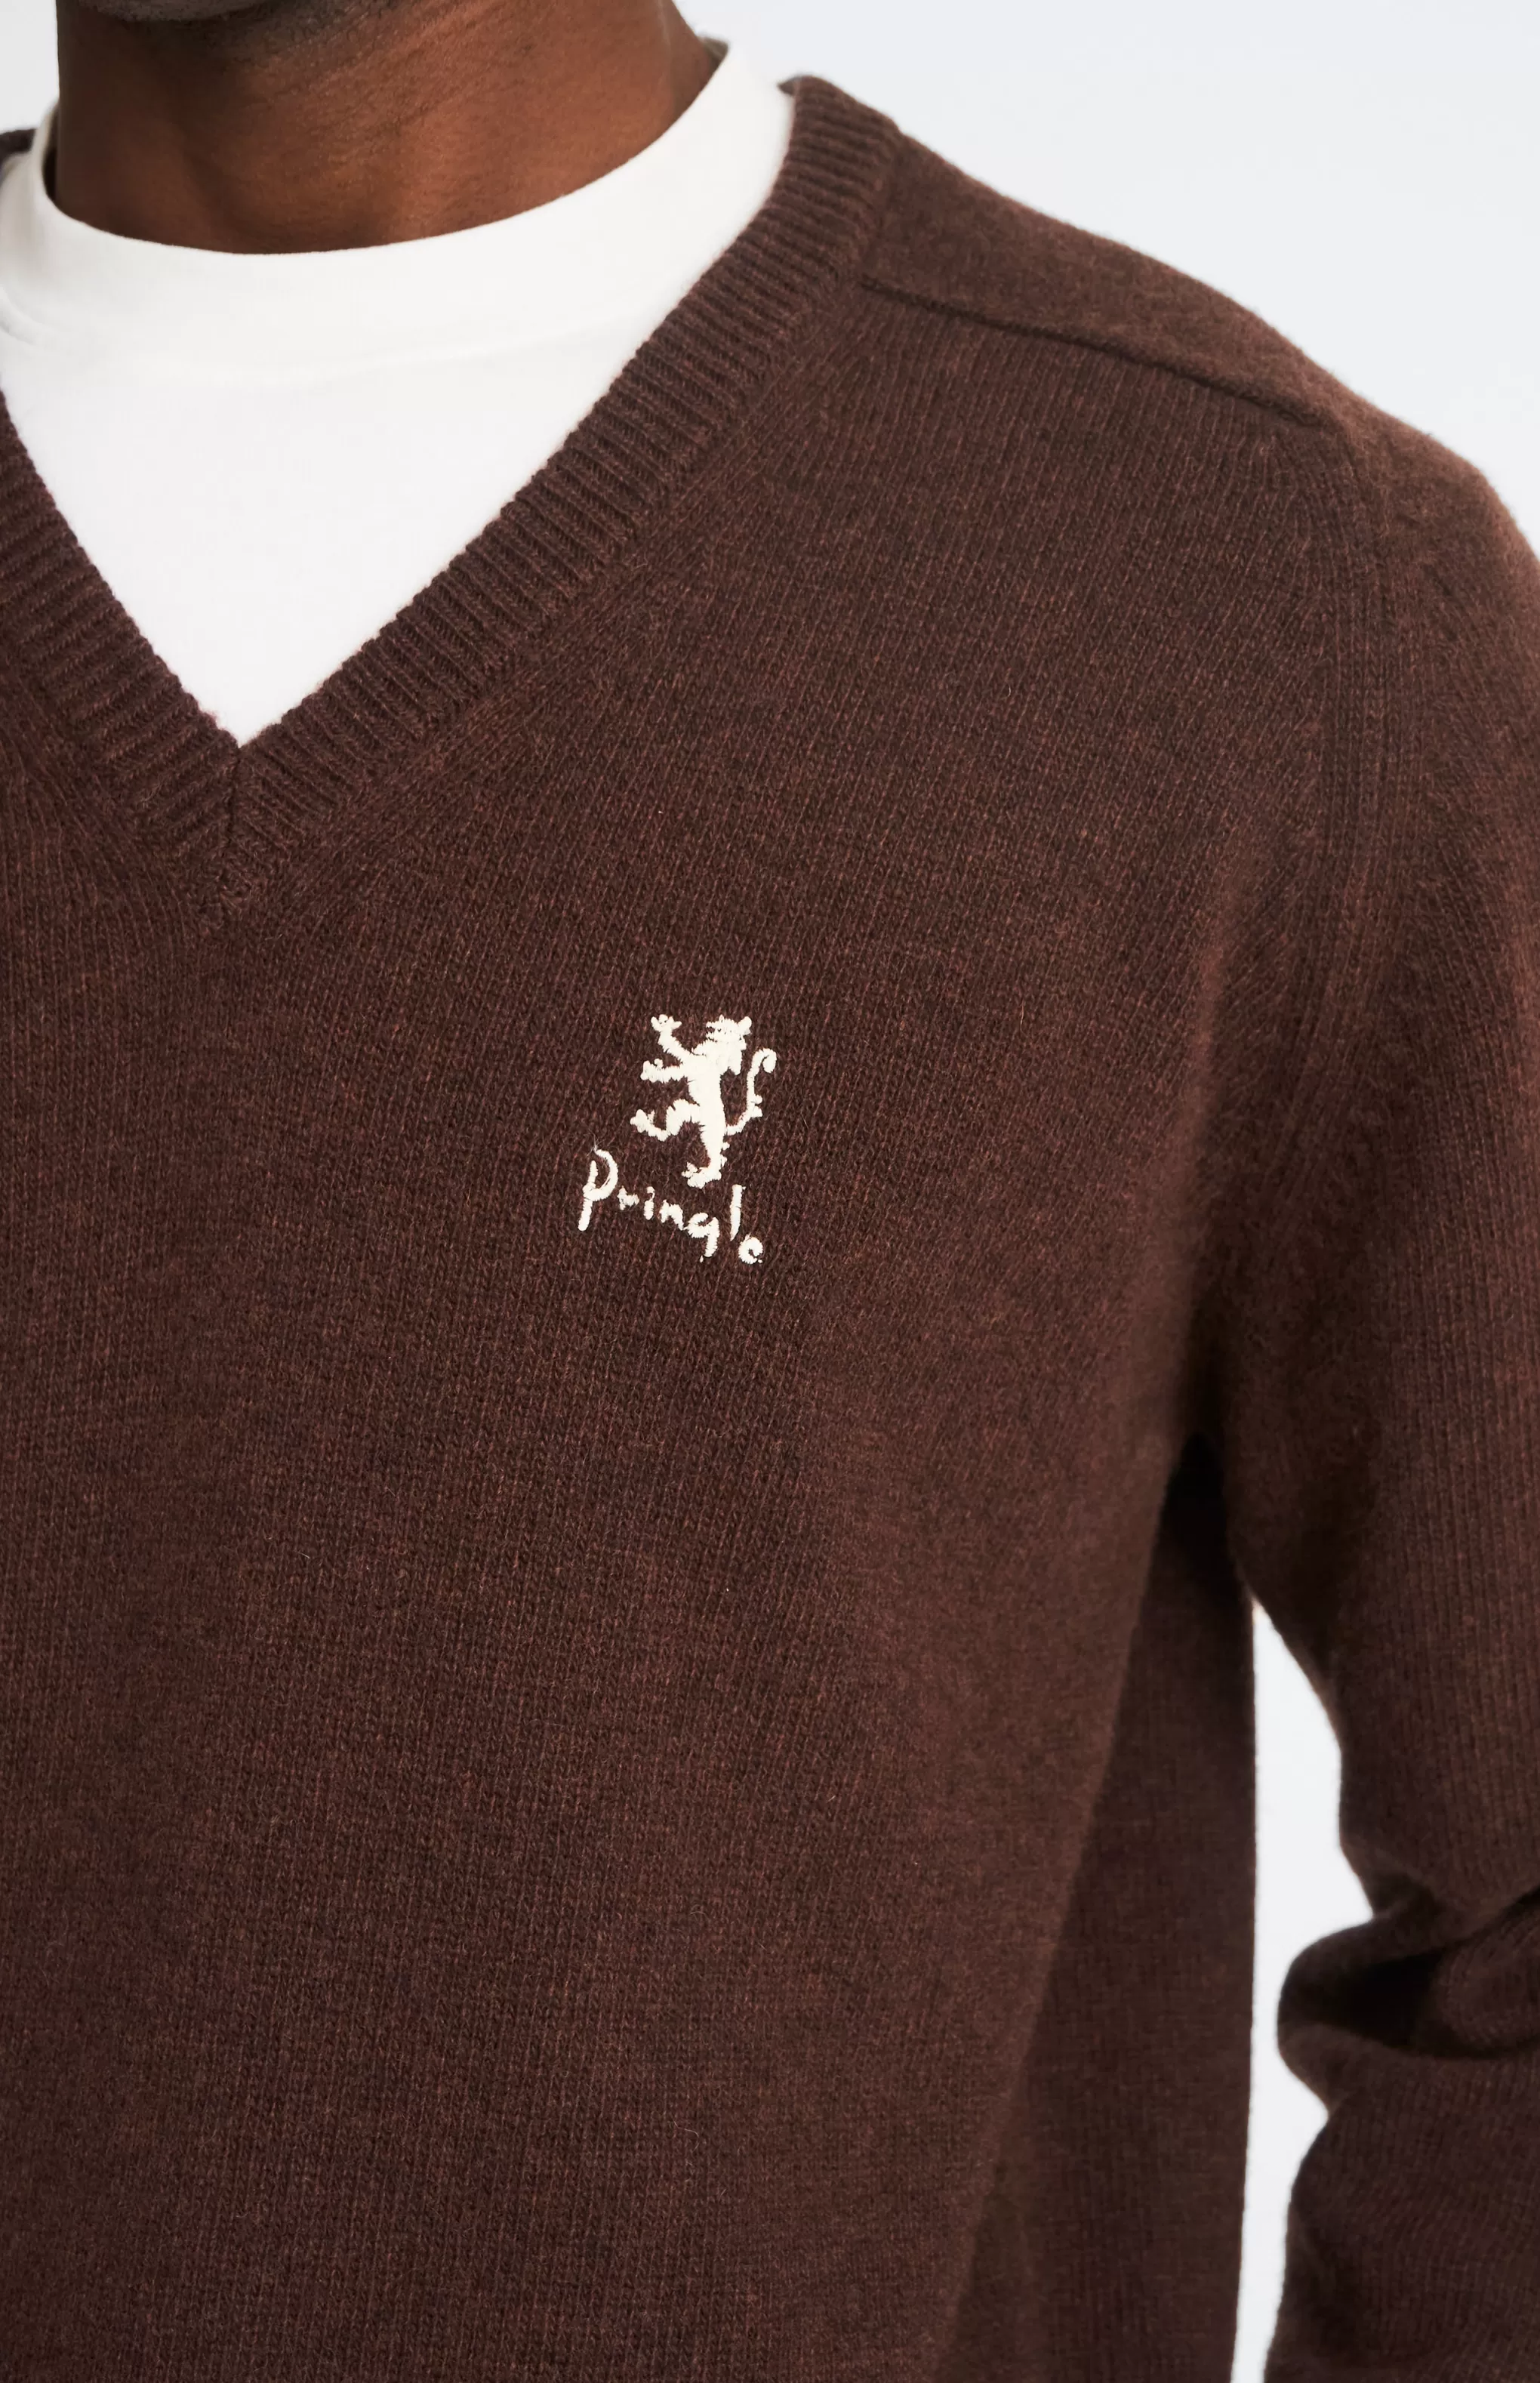 Cheap Lambswool Archive Jumper In In Dark Brown Men Pringle Heritage Unisex Collections